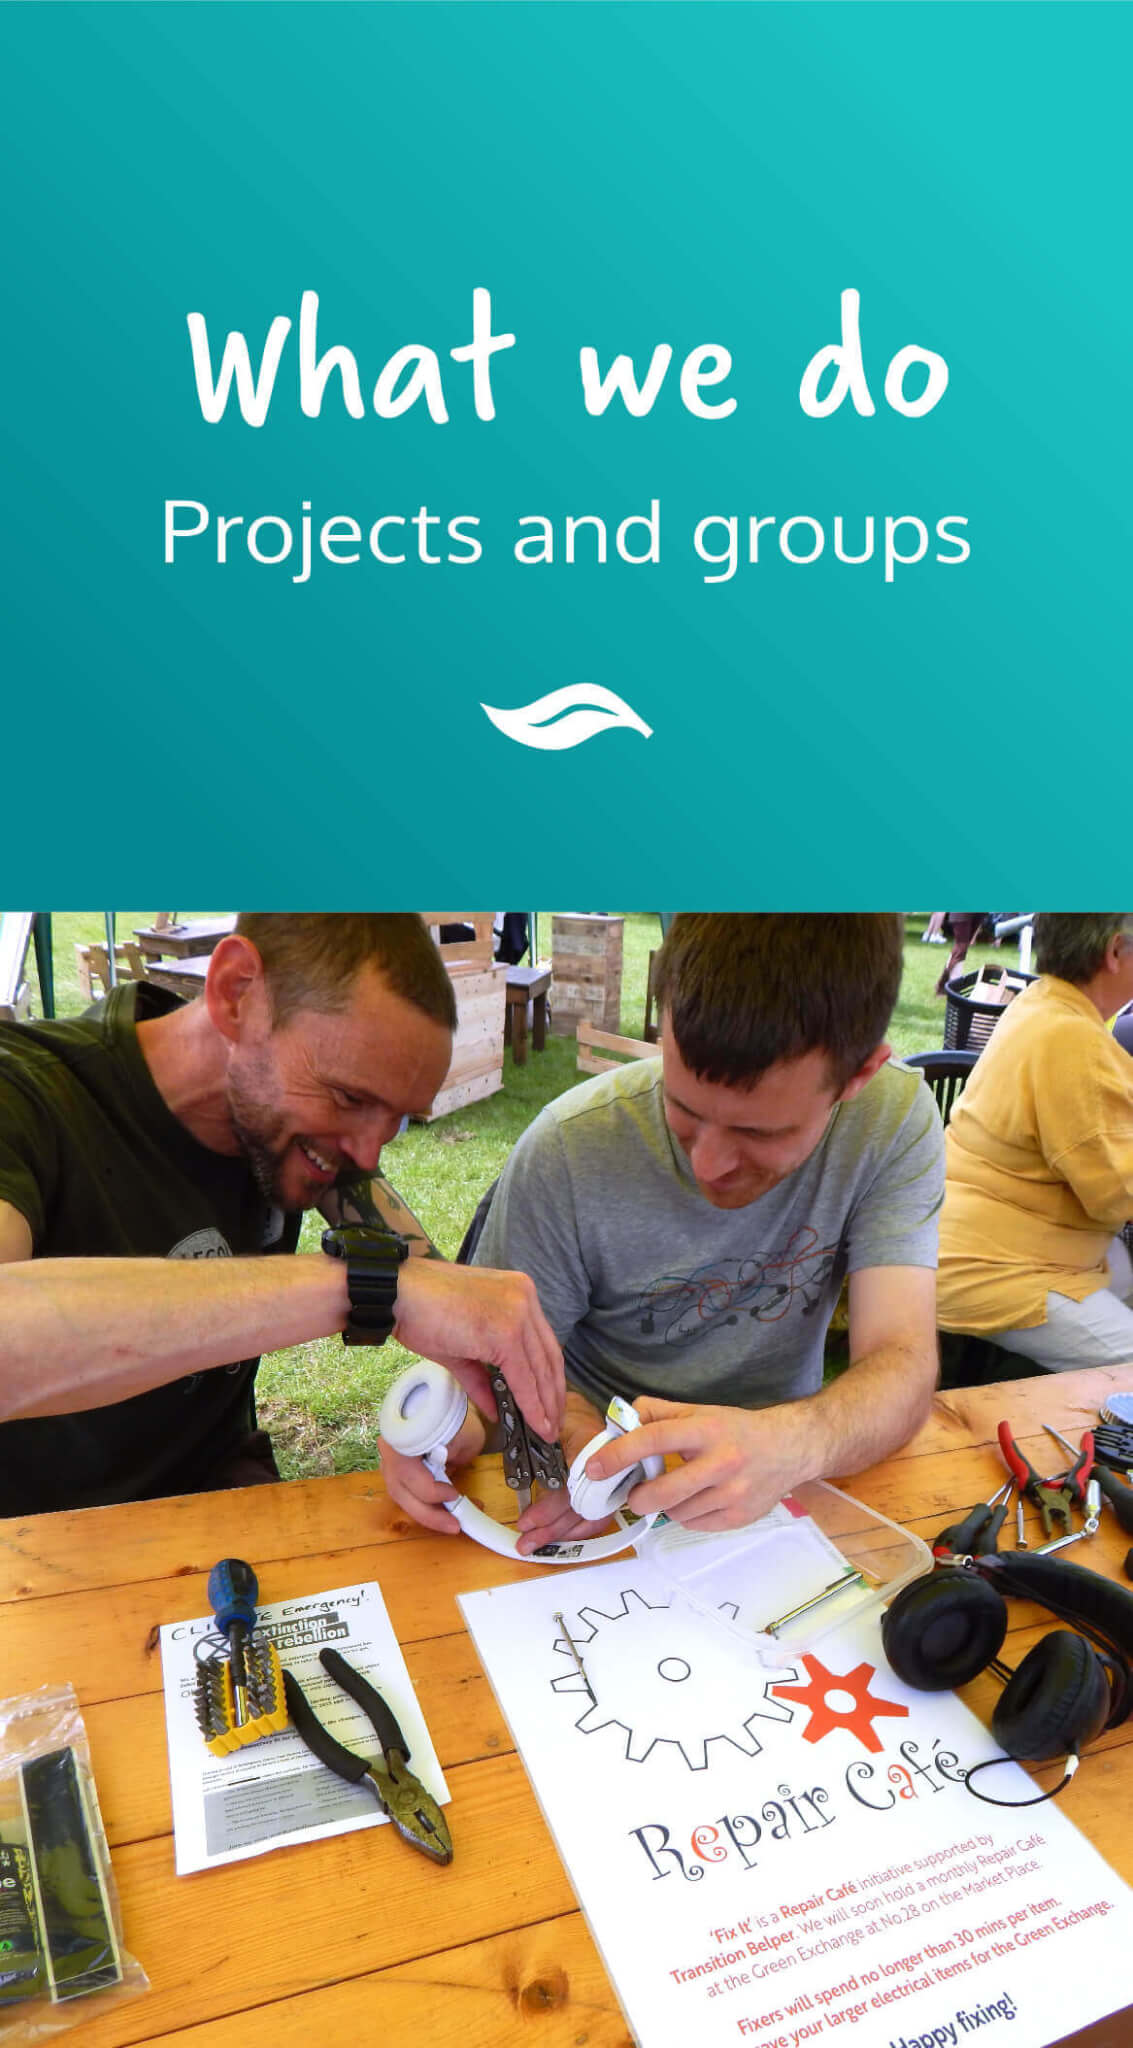 Our projects and services, and groups you can join